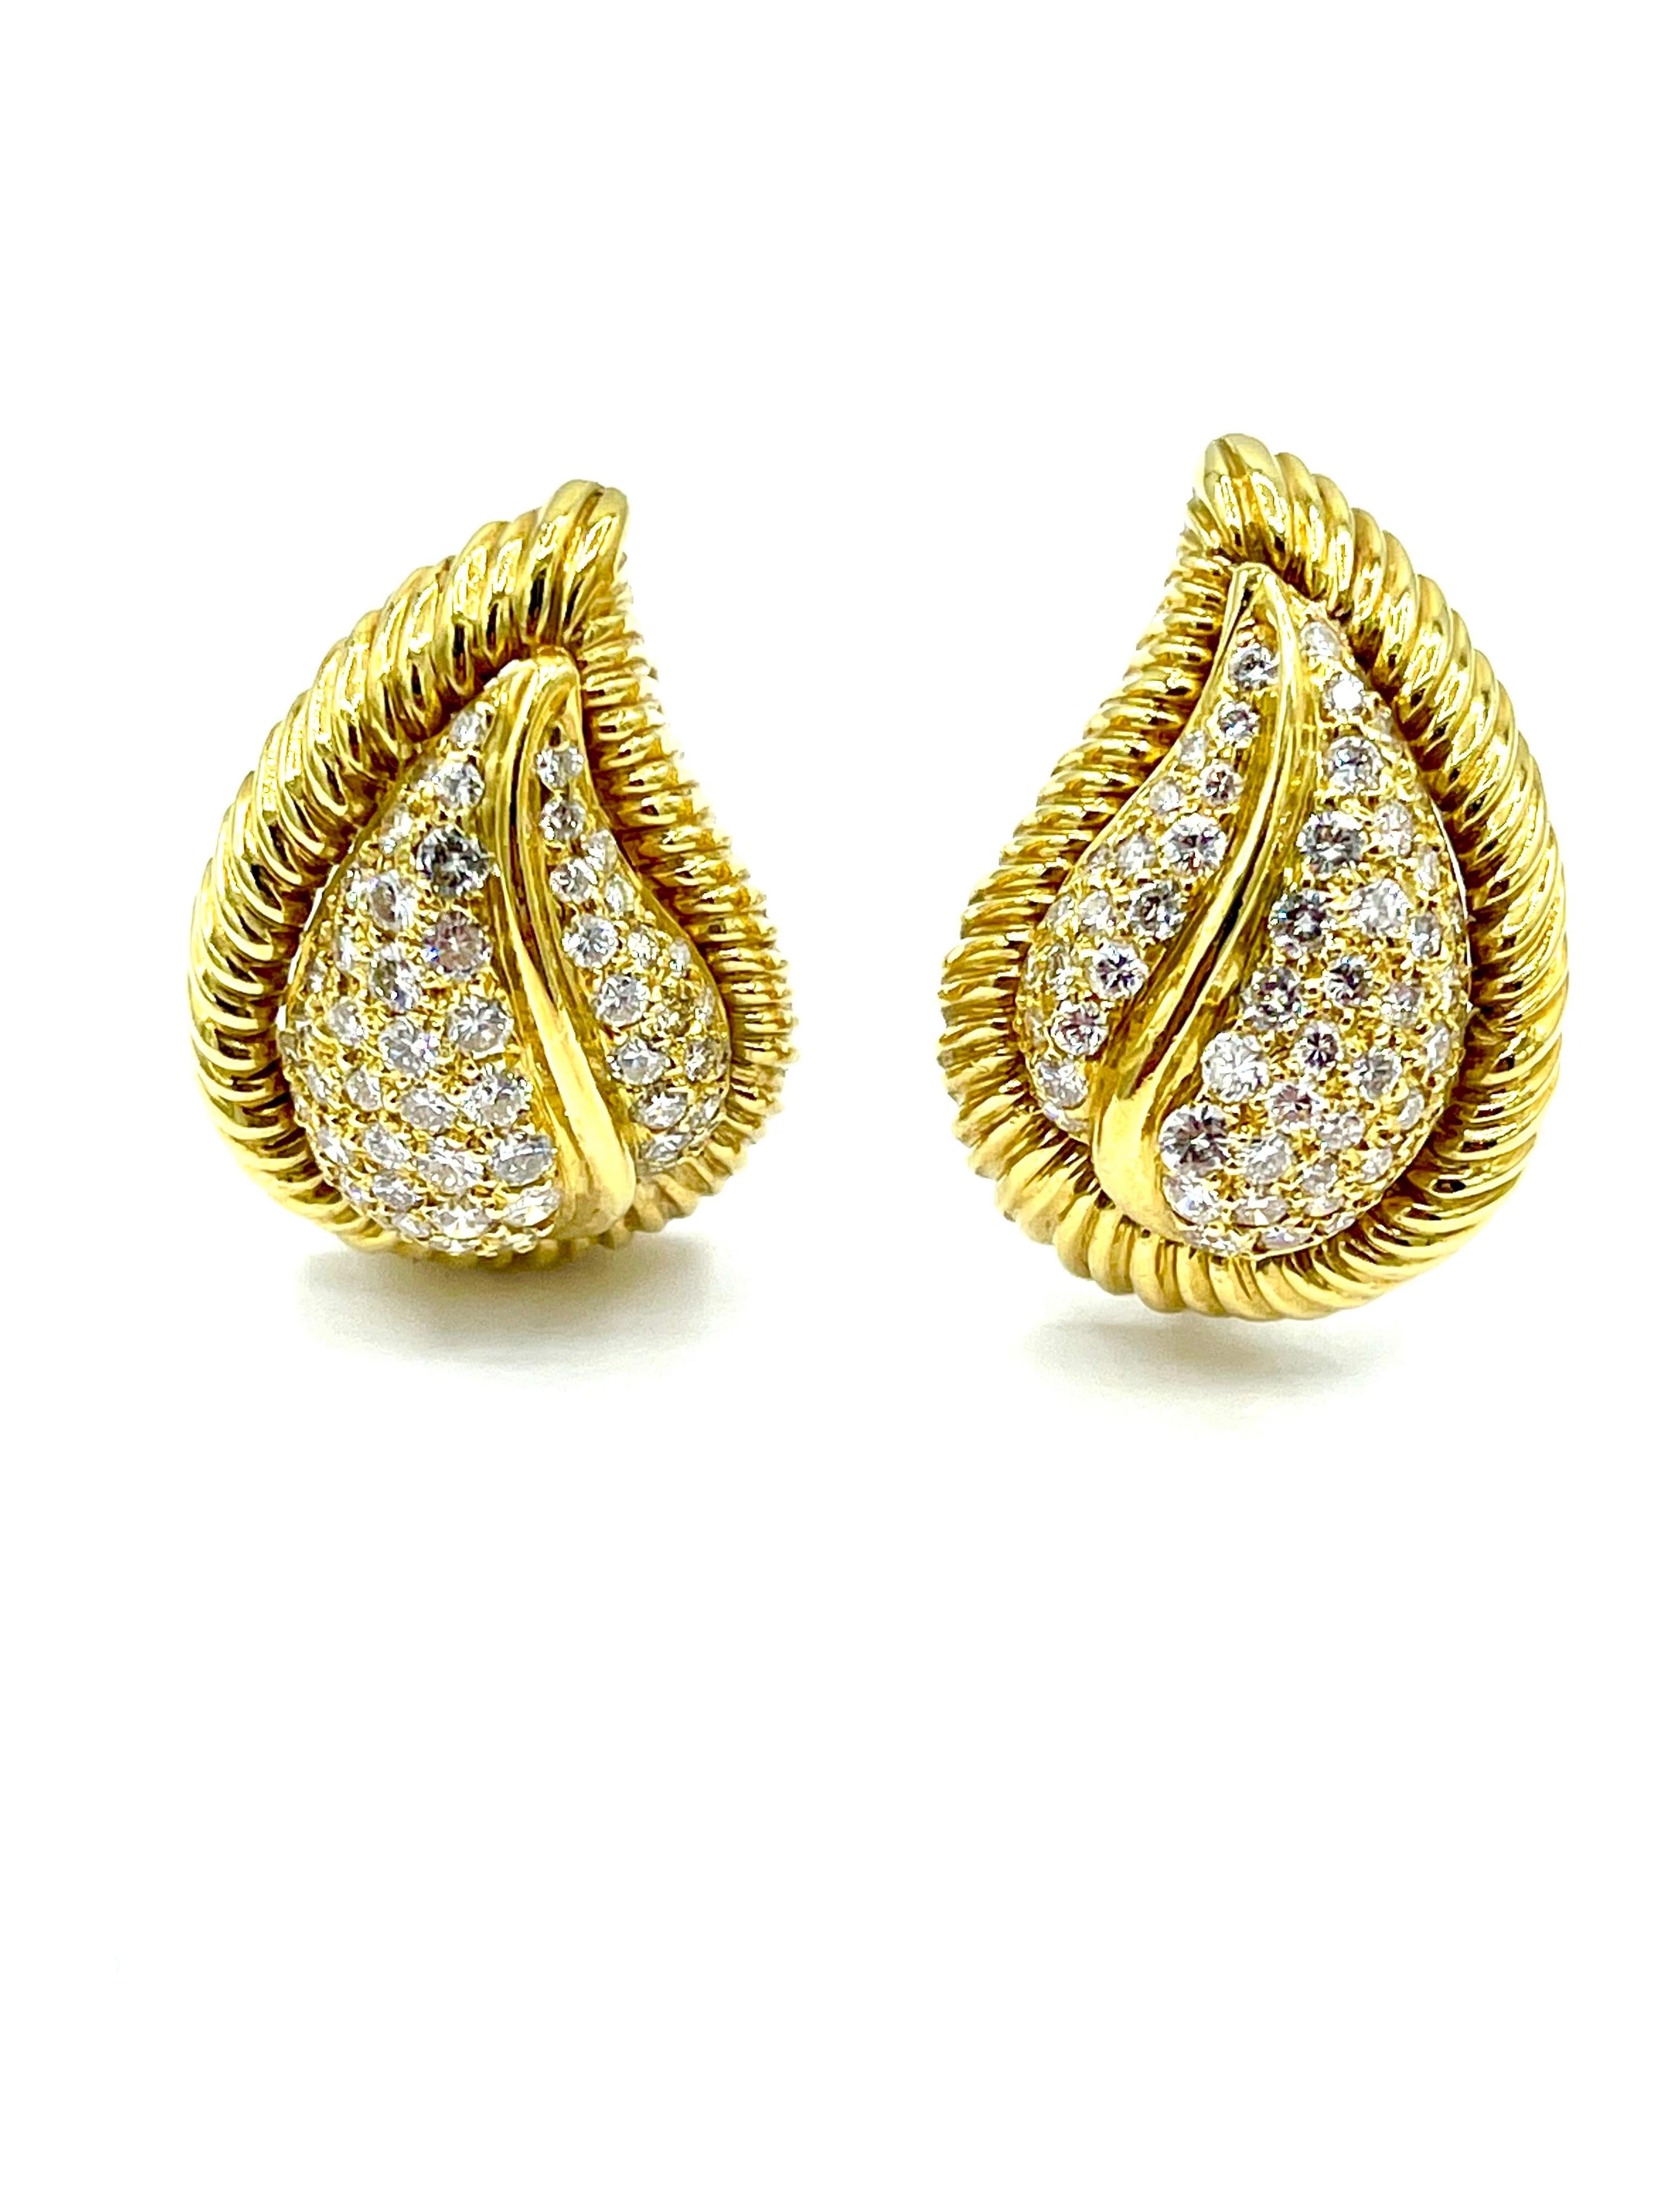 A beautiful pair of pave Diamond and 18K yellow gold leaf clip earrings.  There are a total of 114 round brilliant cut Diamonds for a total weight of 2.50 carats, pave set in a leaf shape with a textured gold border.  The diamonds are G color, VS